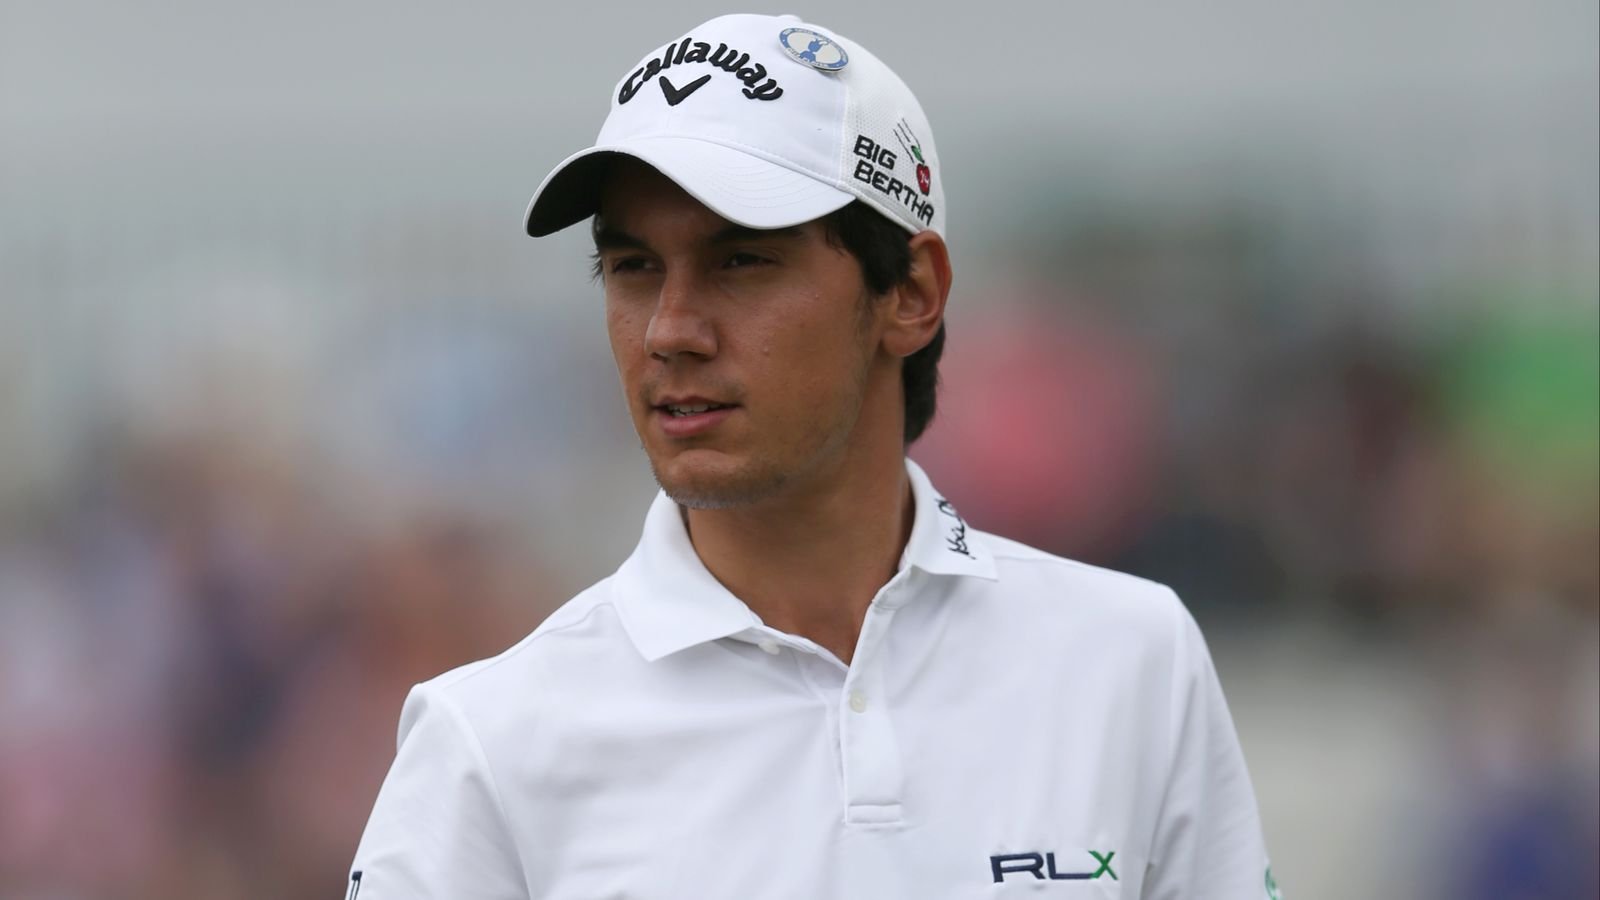 Matteo Manassero recovers from US Open battering to share lead at the KLM Open in Amsterdam | Golf News